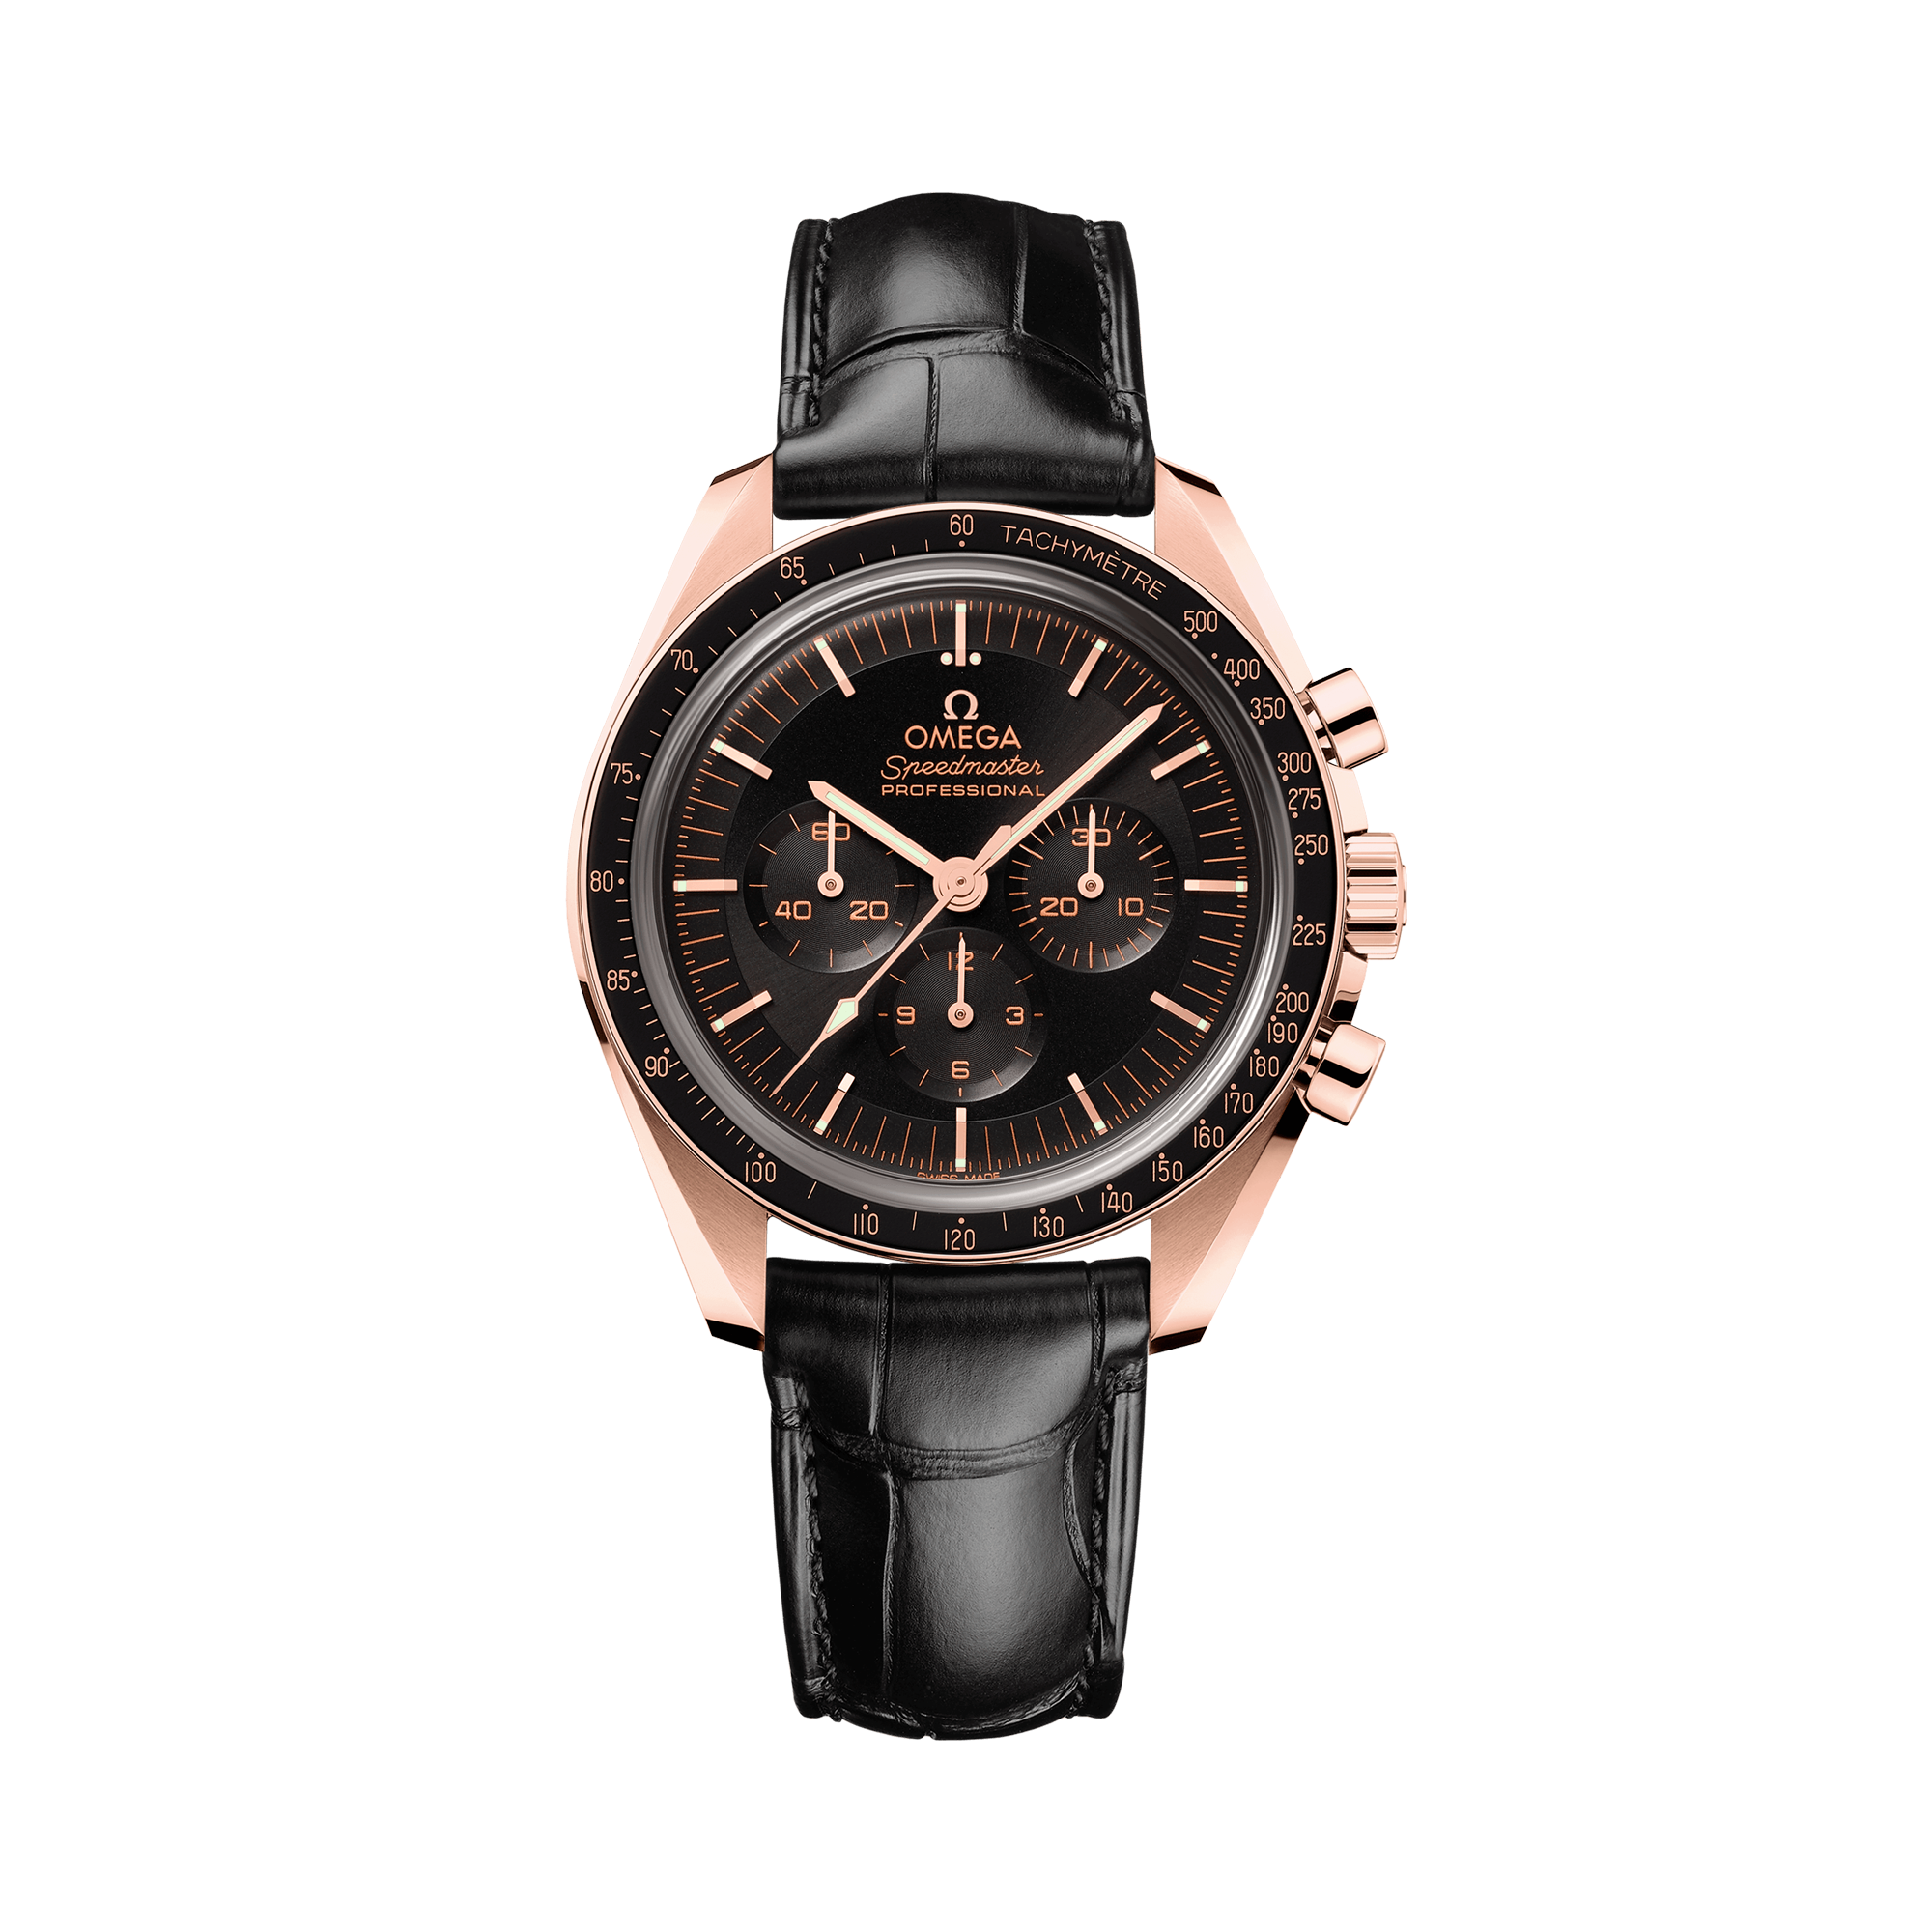 OMEGA Speedmaster Moonwatch Professional Co-Axial Master Chronometer 42mm, Black Dial, Baton Numerals_1